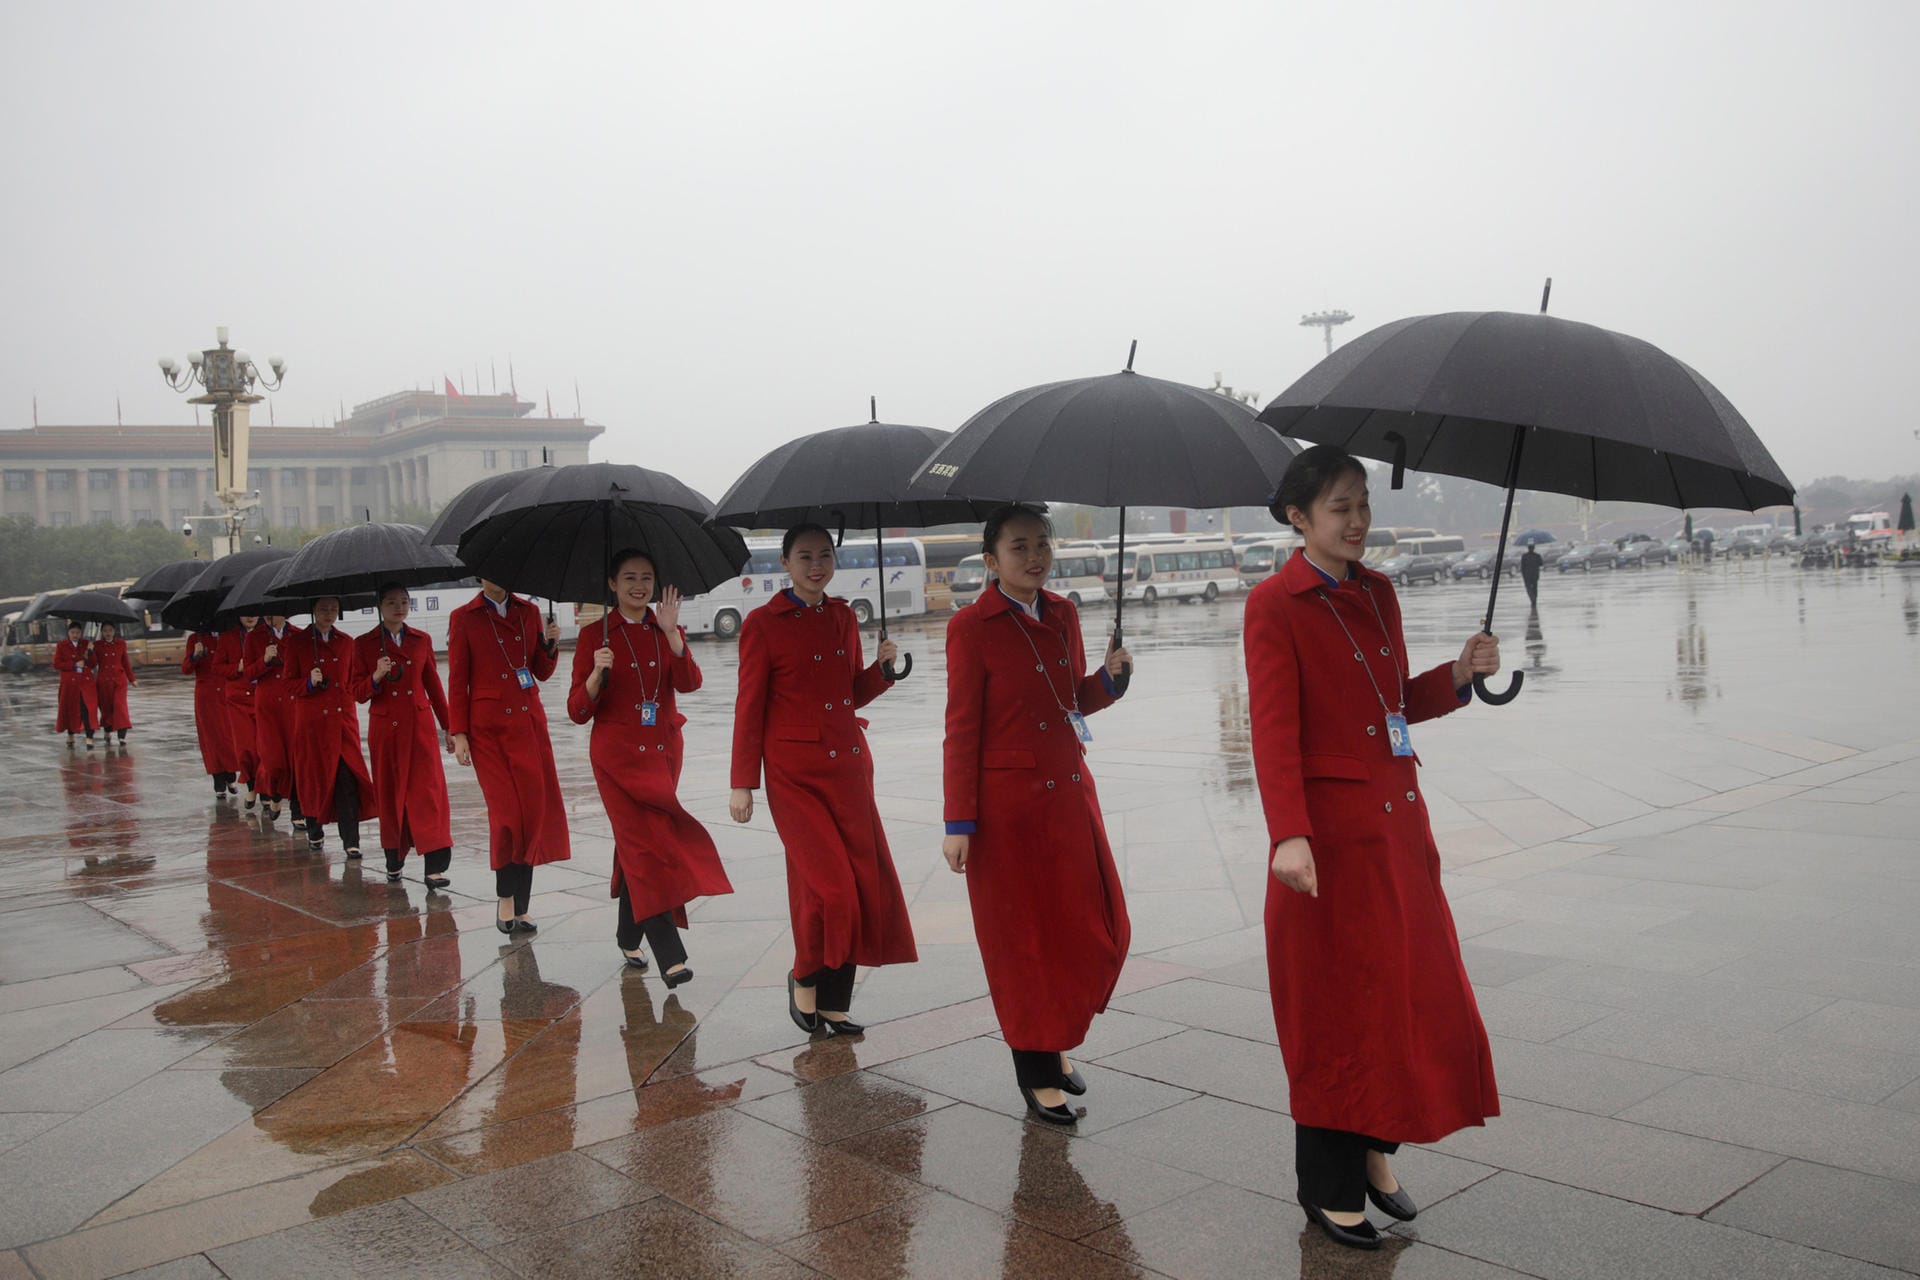 Hostesses are seen at the Tiananmen Square during the opening of the 19th National Congress of the Communist Party of China at the Great Hall of the People in Beijing